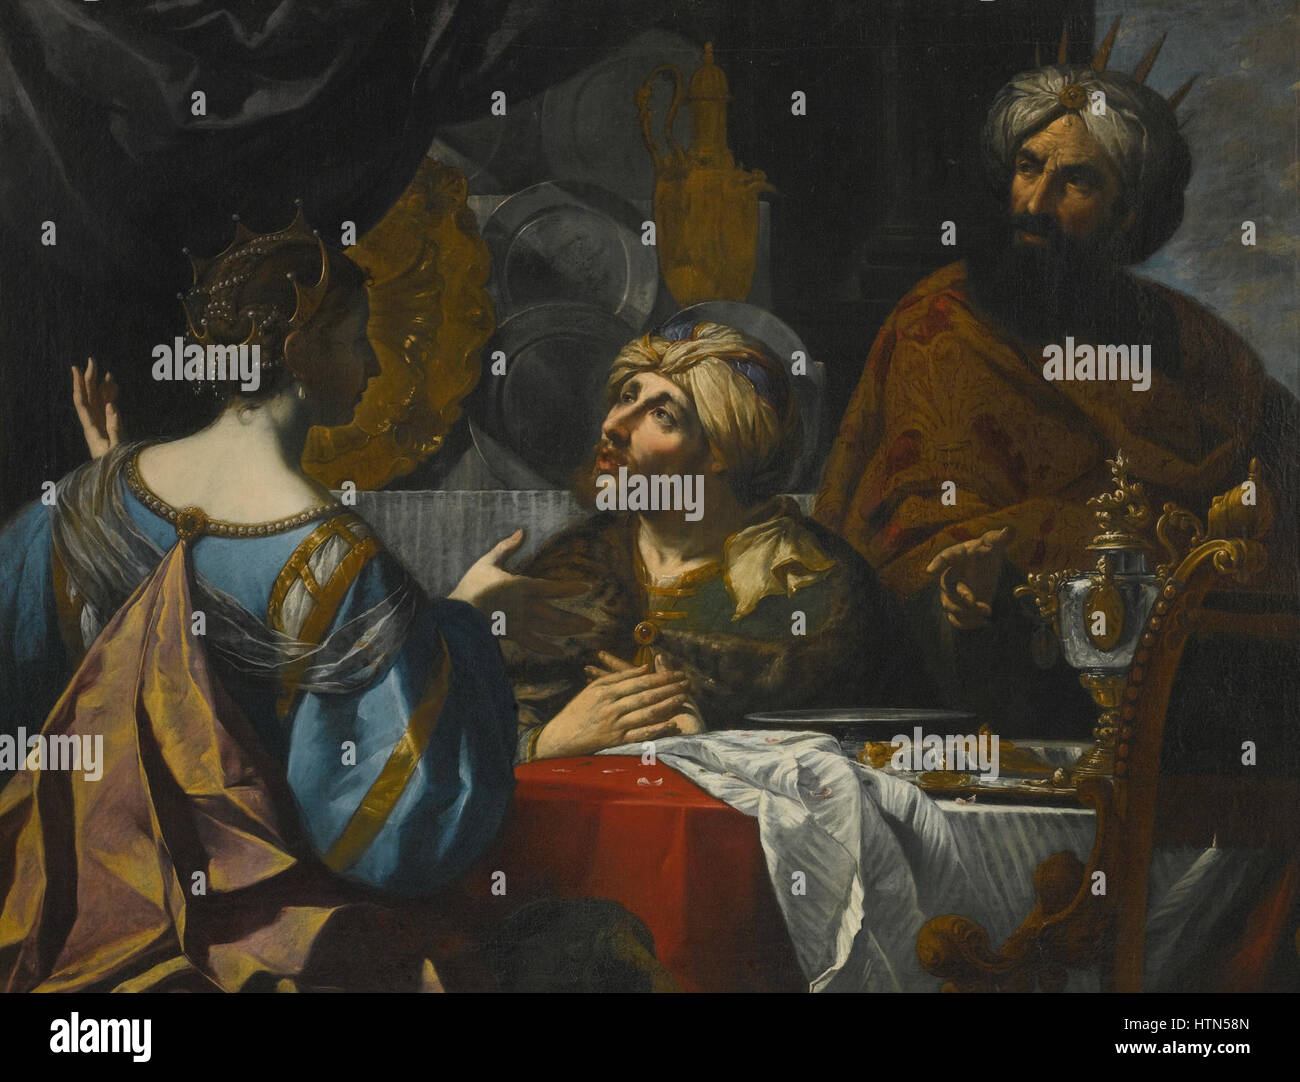 Pietro Paolini - The Intercession of Esther with King Ahasuerus and Haman Stock Photo